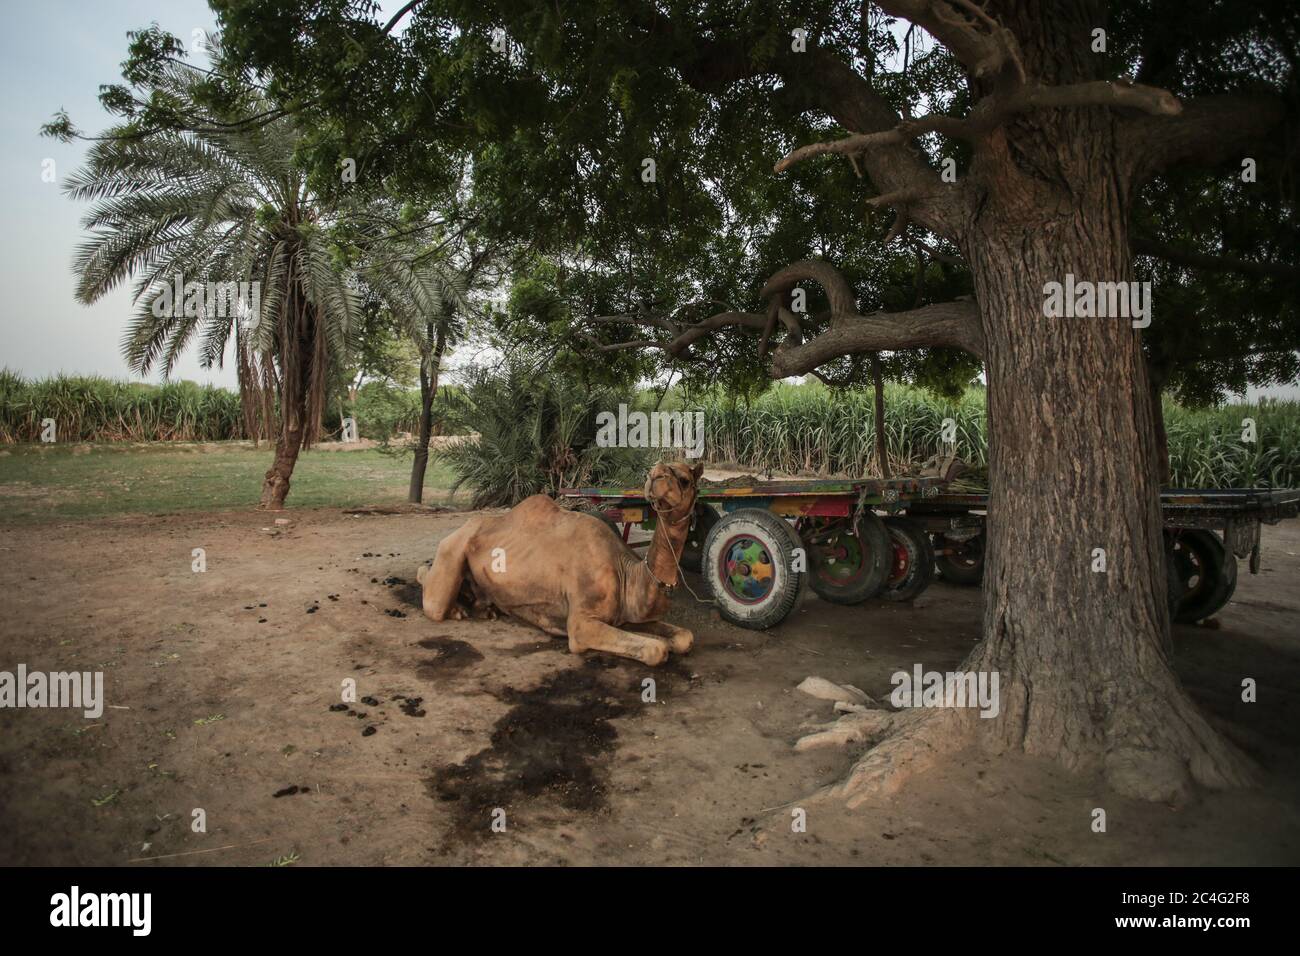 Camel Sitting Under The Tree Near Its Cart In Moro, Sindh, Pakistan Stock Photo